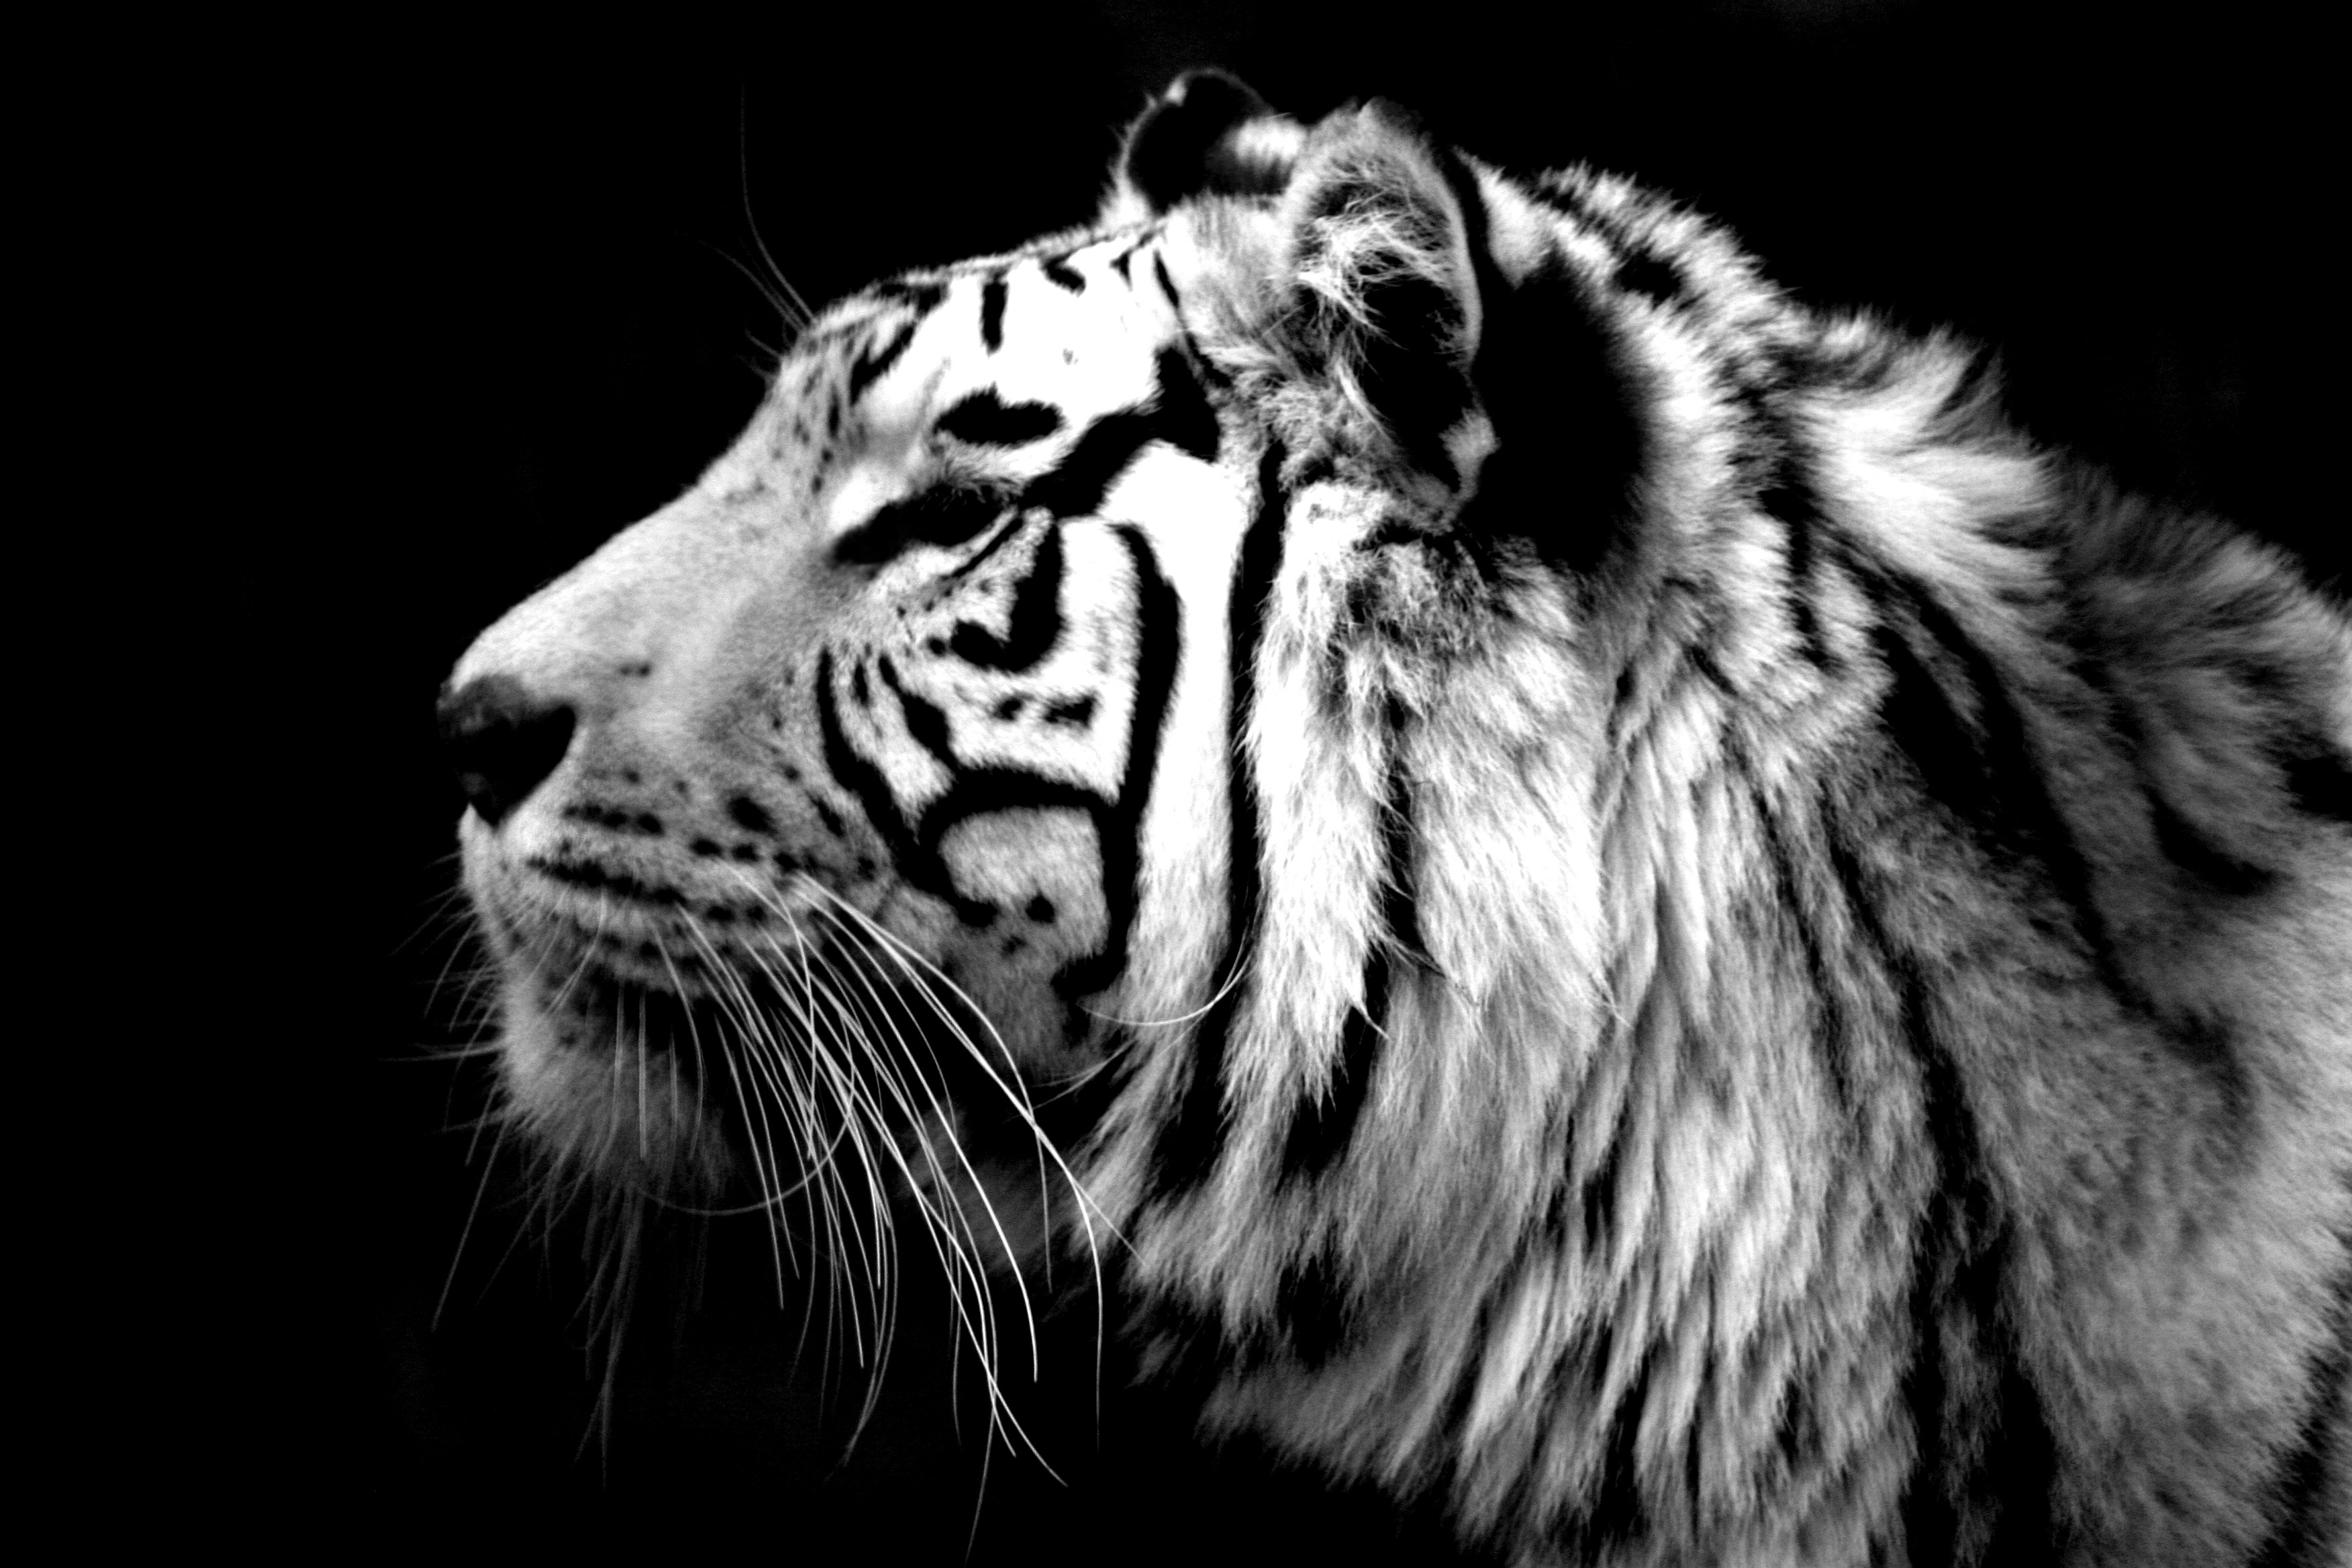 White Tiger Computer Wallpapers Desktop Backgrounds 3504x2336 ID 3504x2336